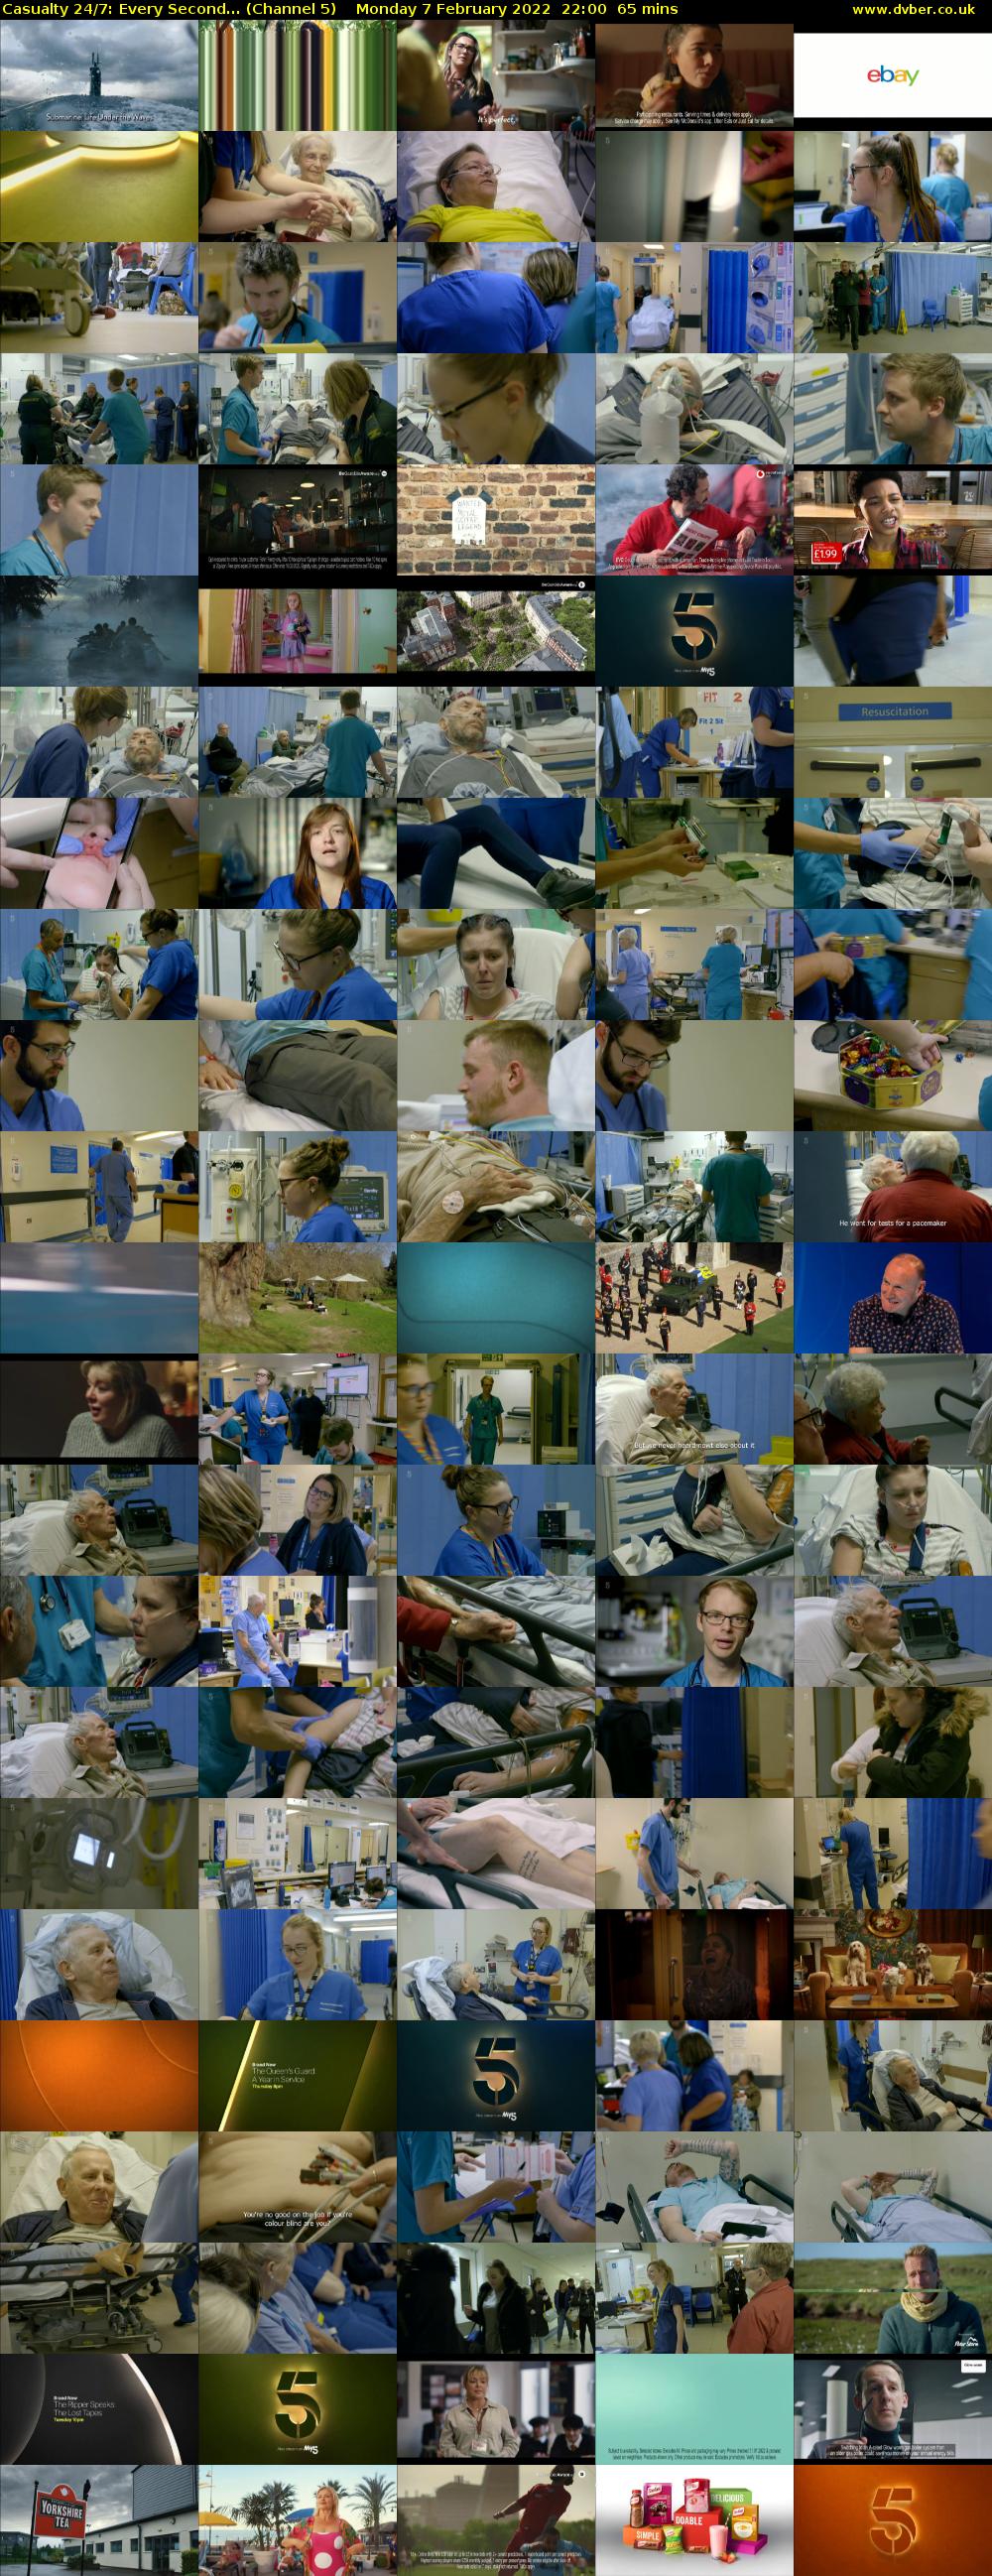 Casualty 24/7: Every Second... (Channel 5) Monday 7 February 2022 22:00 - 23:05